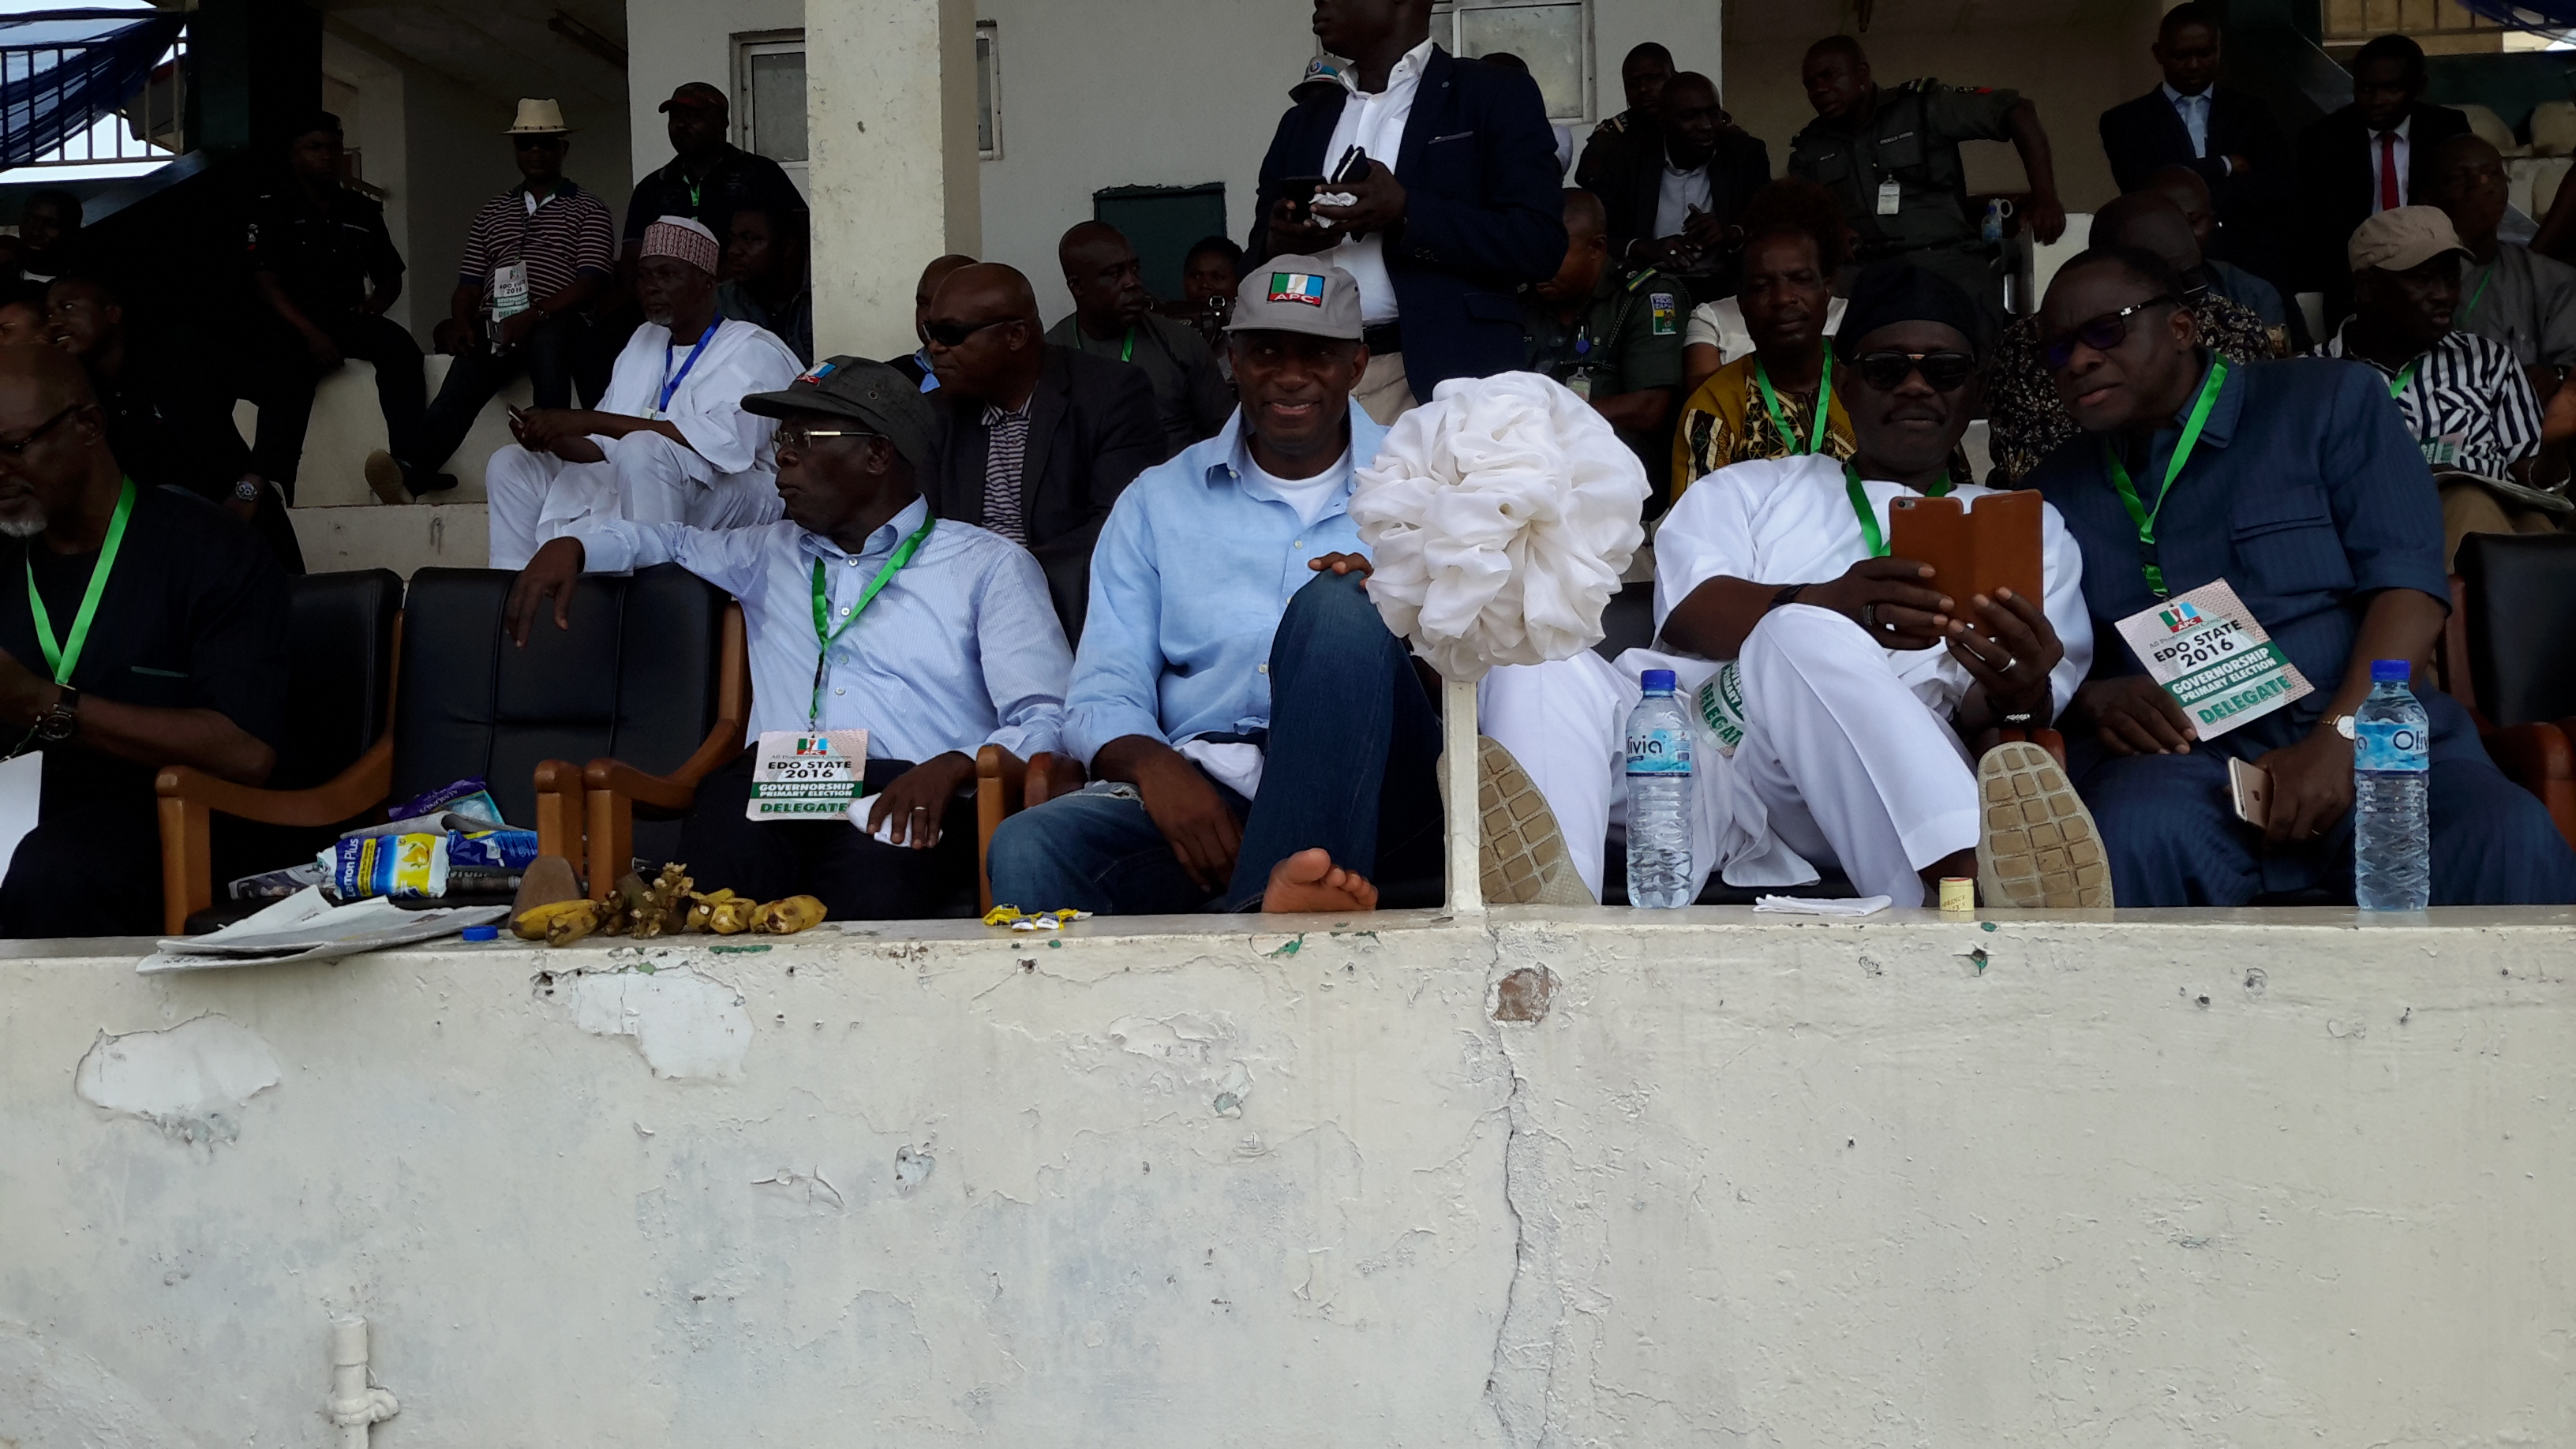 Edo State Governor Adams Oshiomhole at the State Stand of the Samuel Ogbemudia Stadium waiting for the commencement of Edo APC governorship primary election. Photo by Oladipo Airenakho.